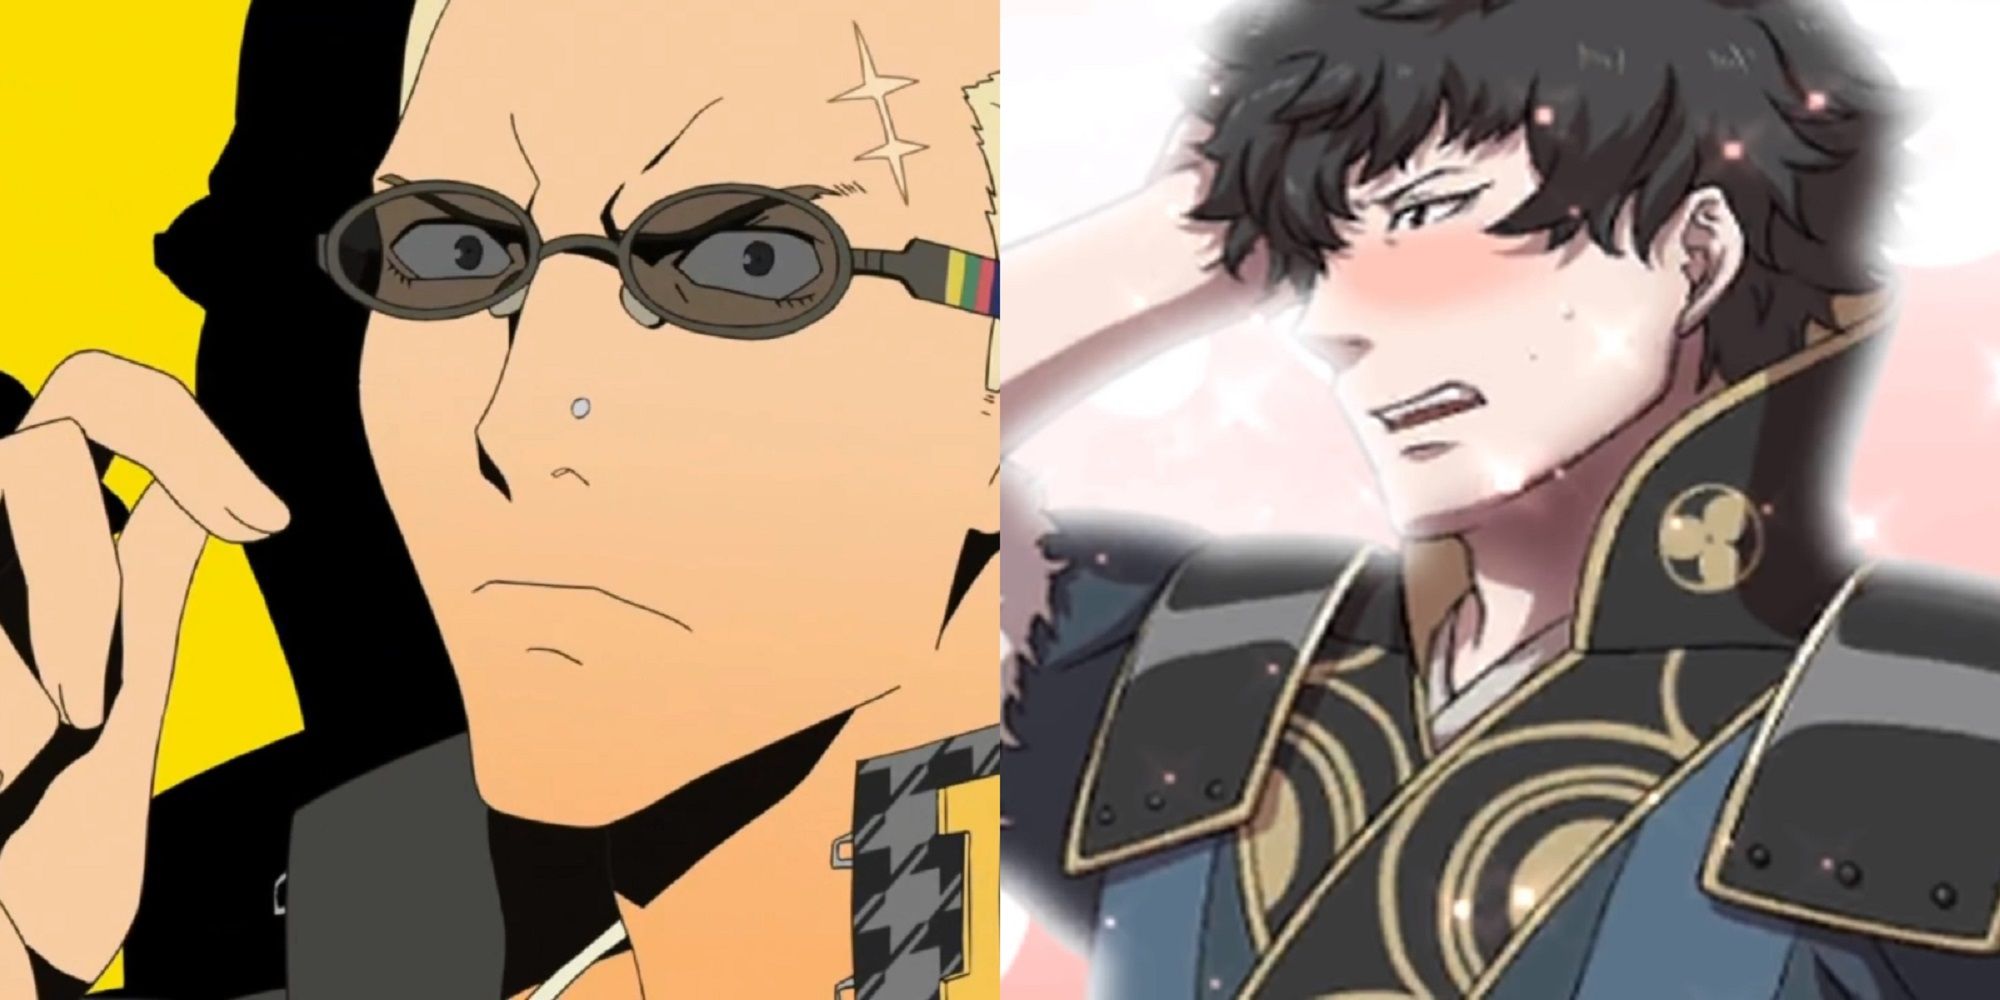 Split image of Kanji Tatsumi in Persona 4's opening and Lon'qu's confessional still in Fire Emblem Awakening